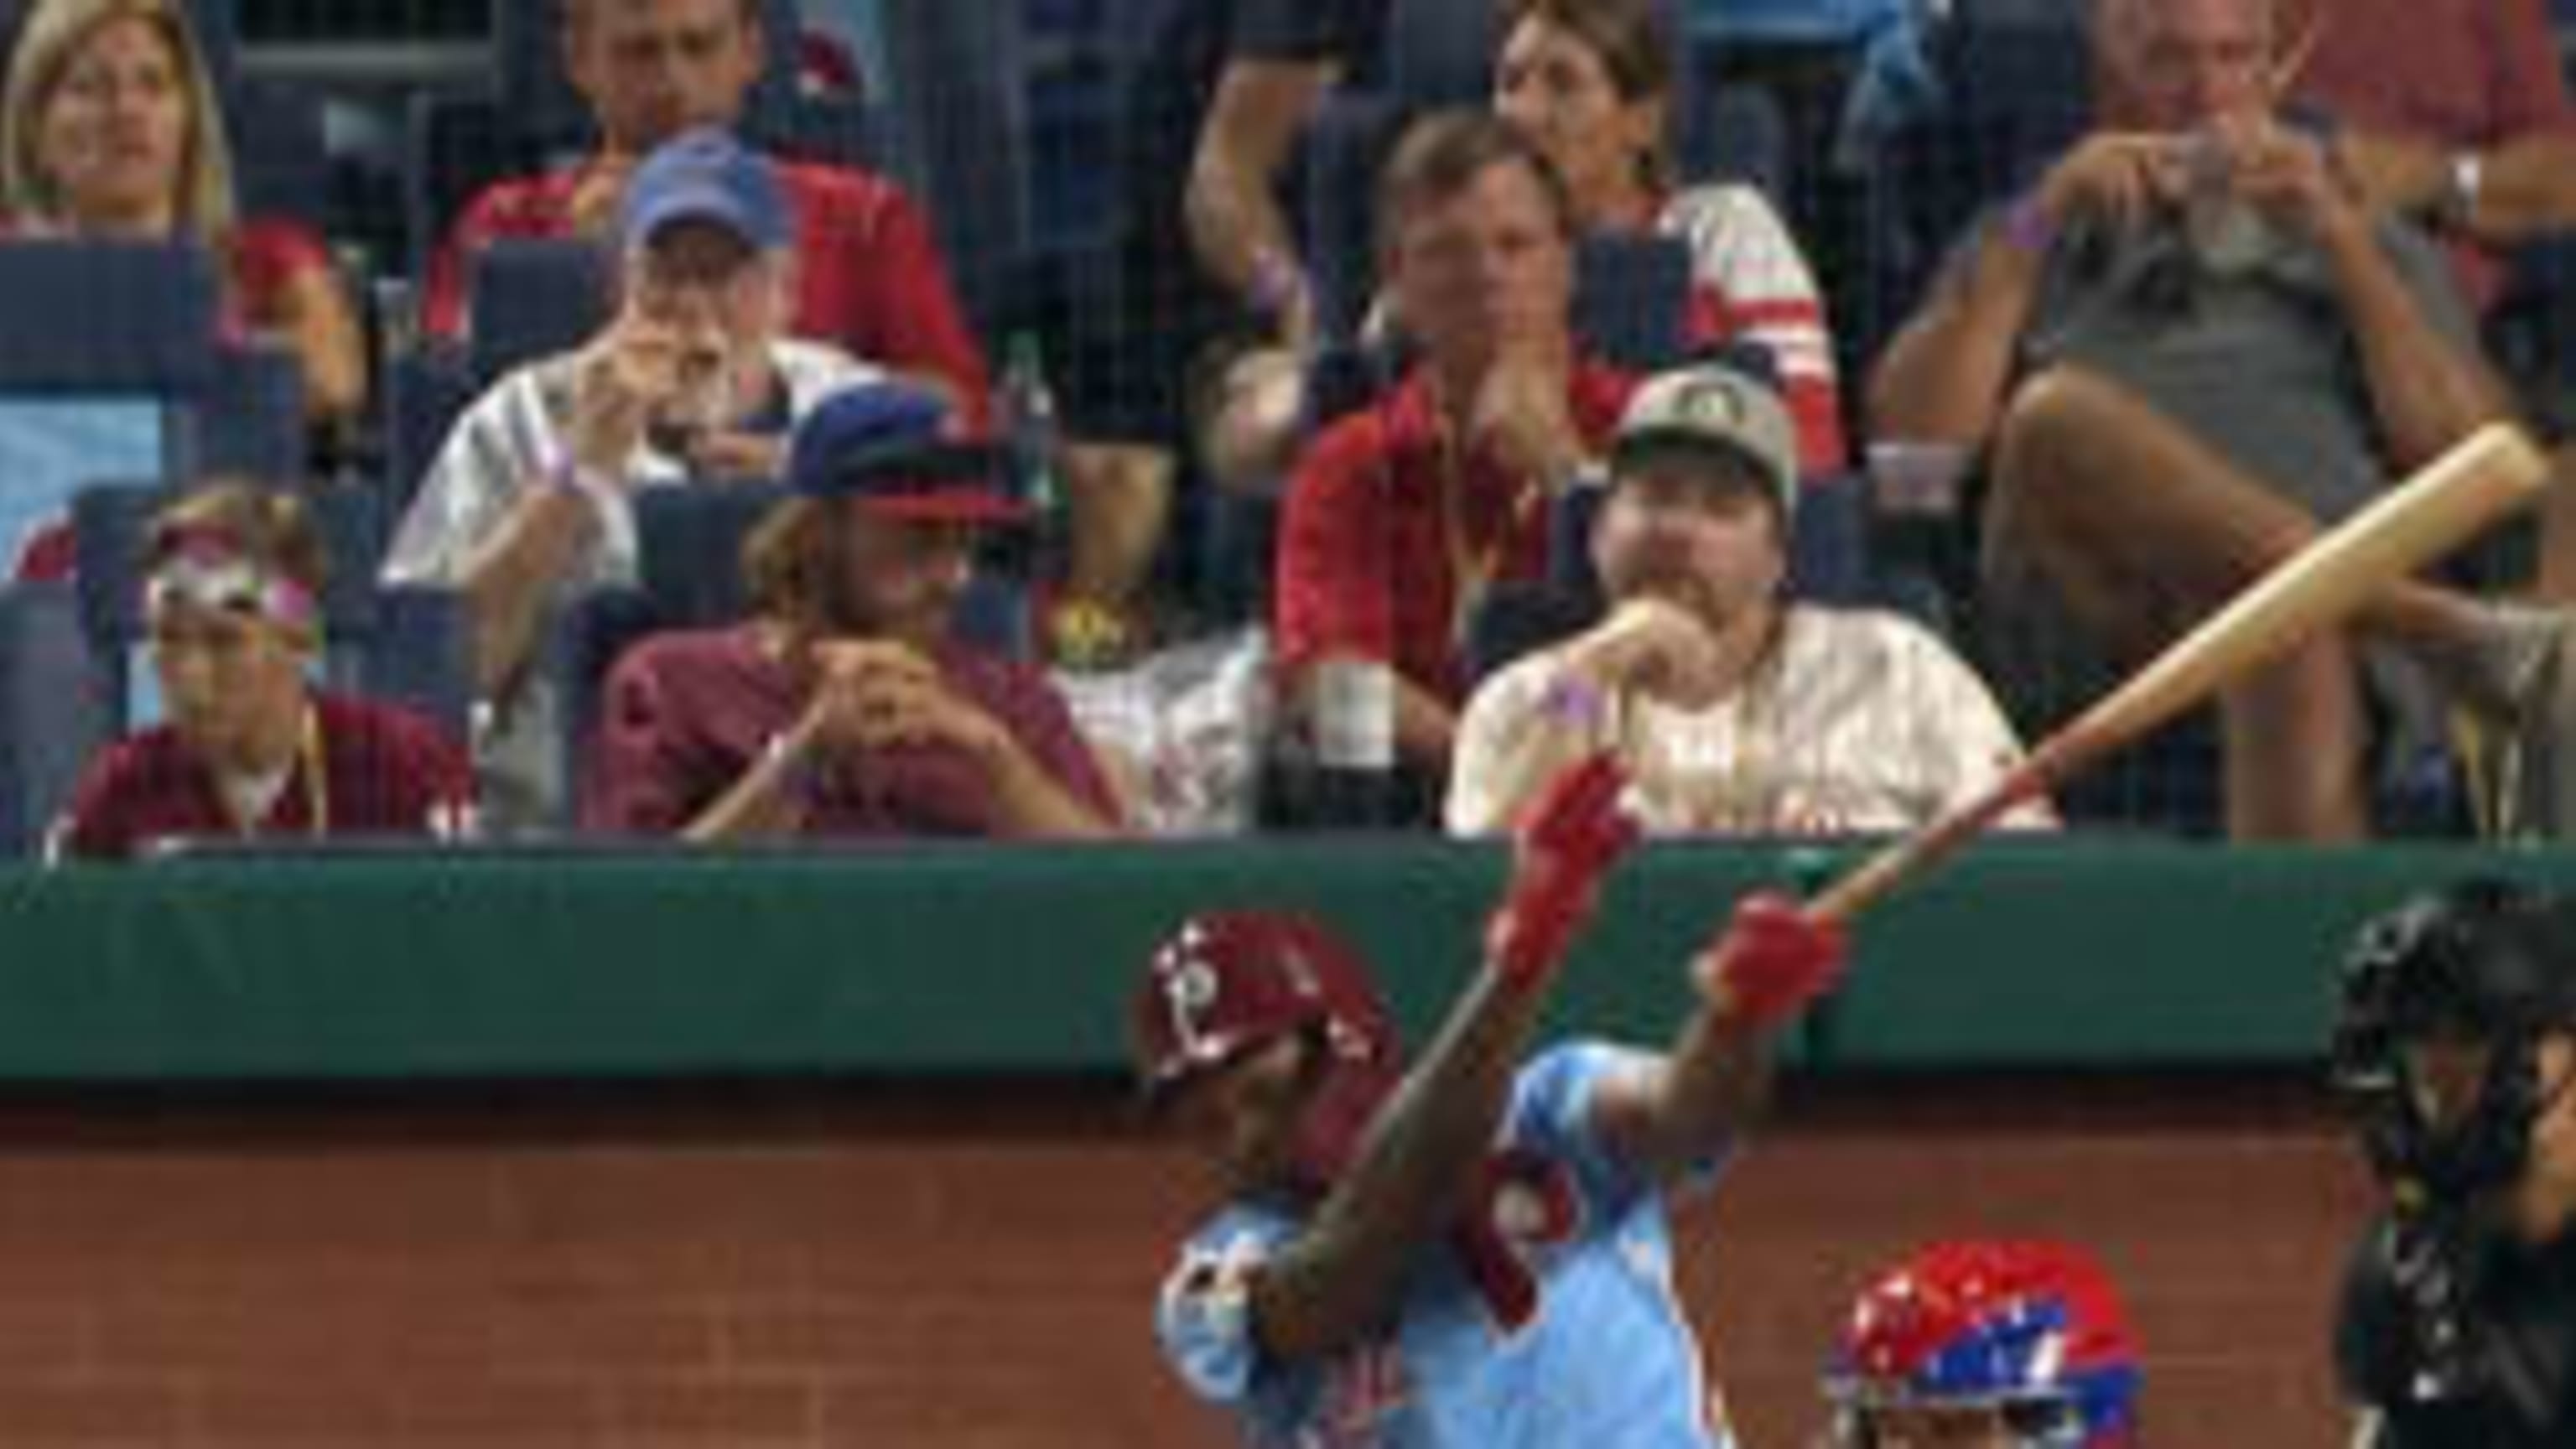 Bryce Harper's walkoff grand slam lifts Phillies over Cubs - The